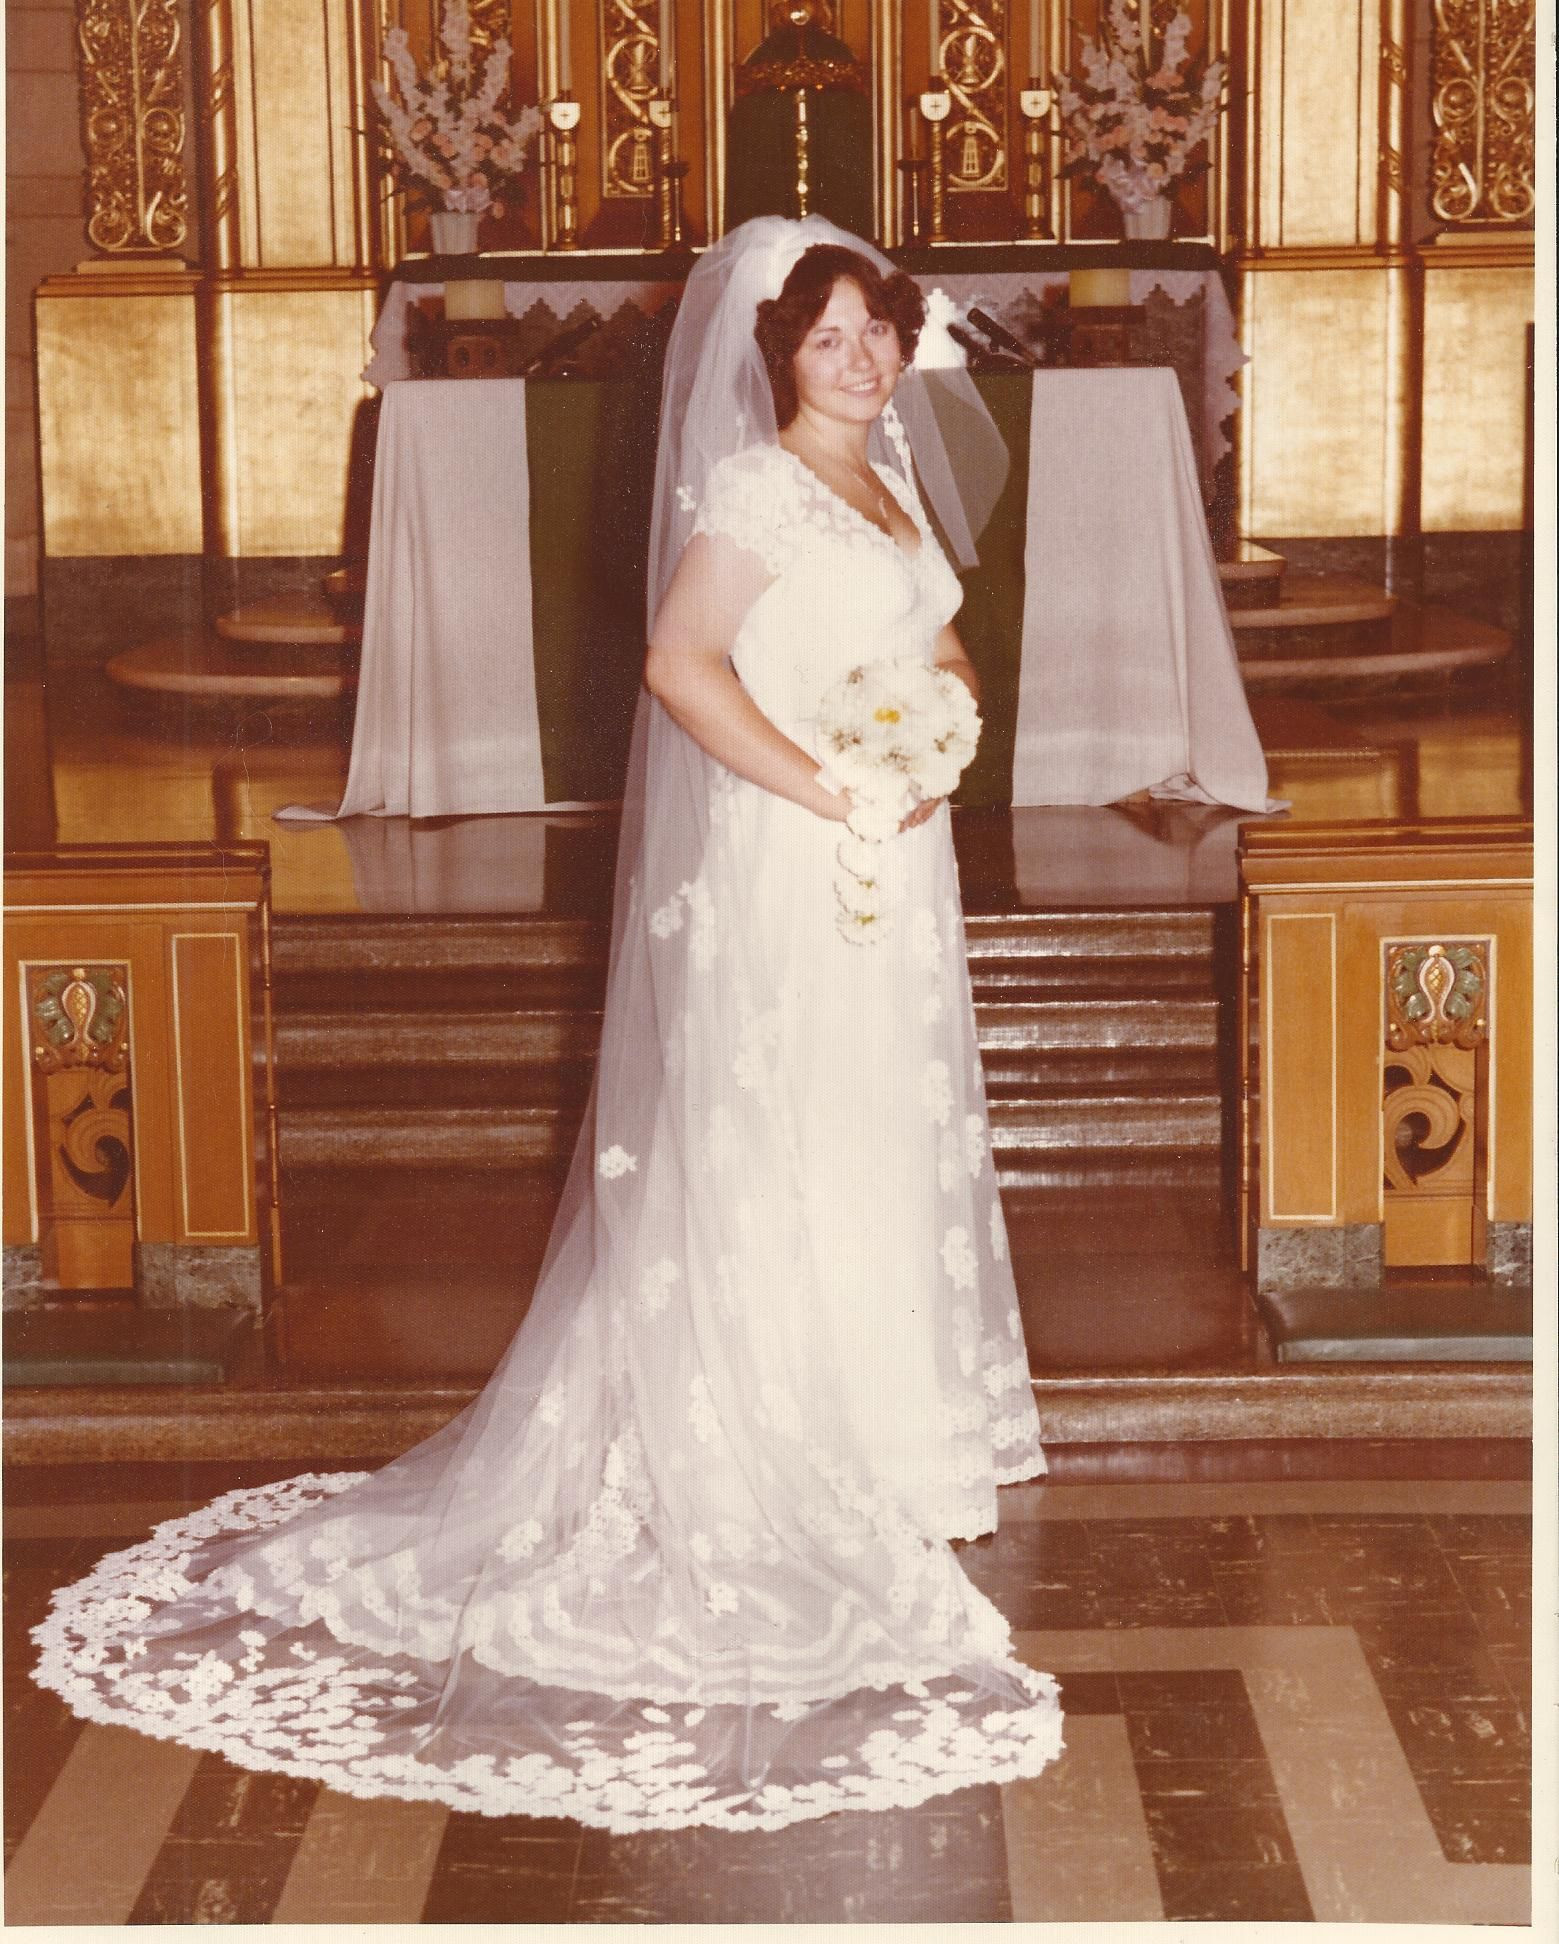 My Wedding Dress
 In 1976 my wedding dress cost 3 times my monthly salary